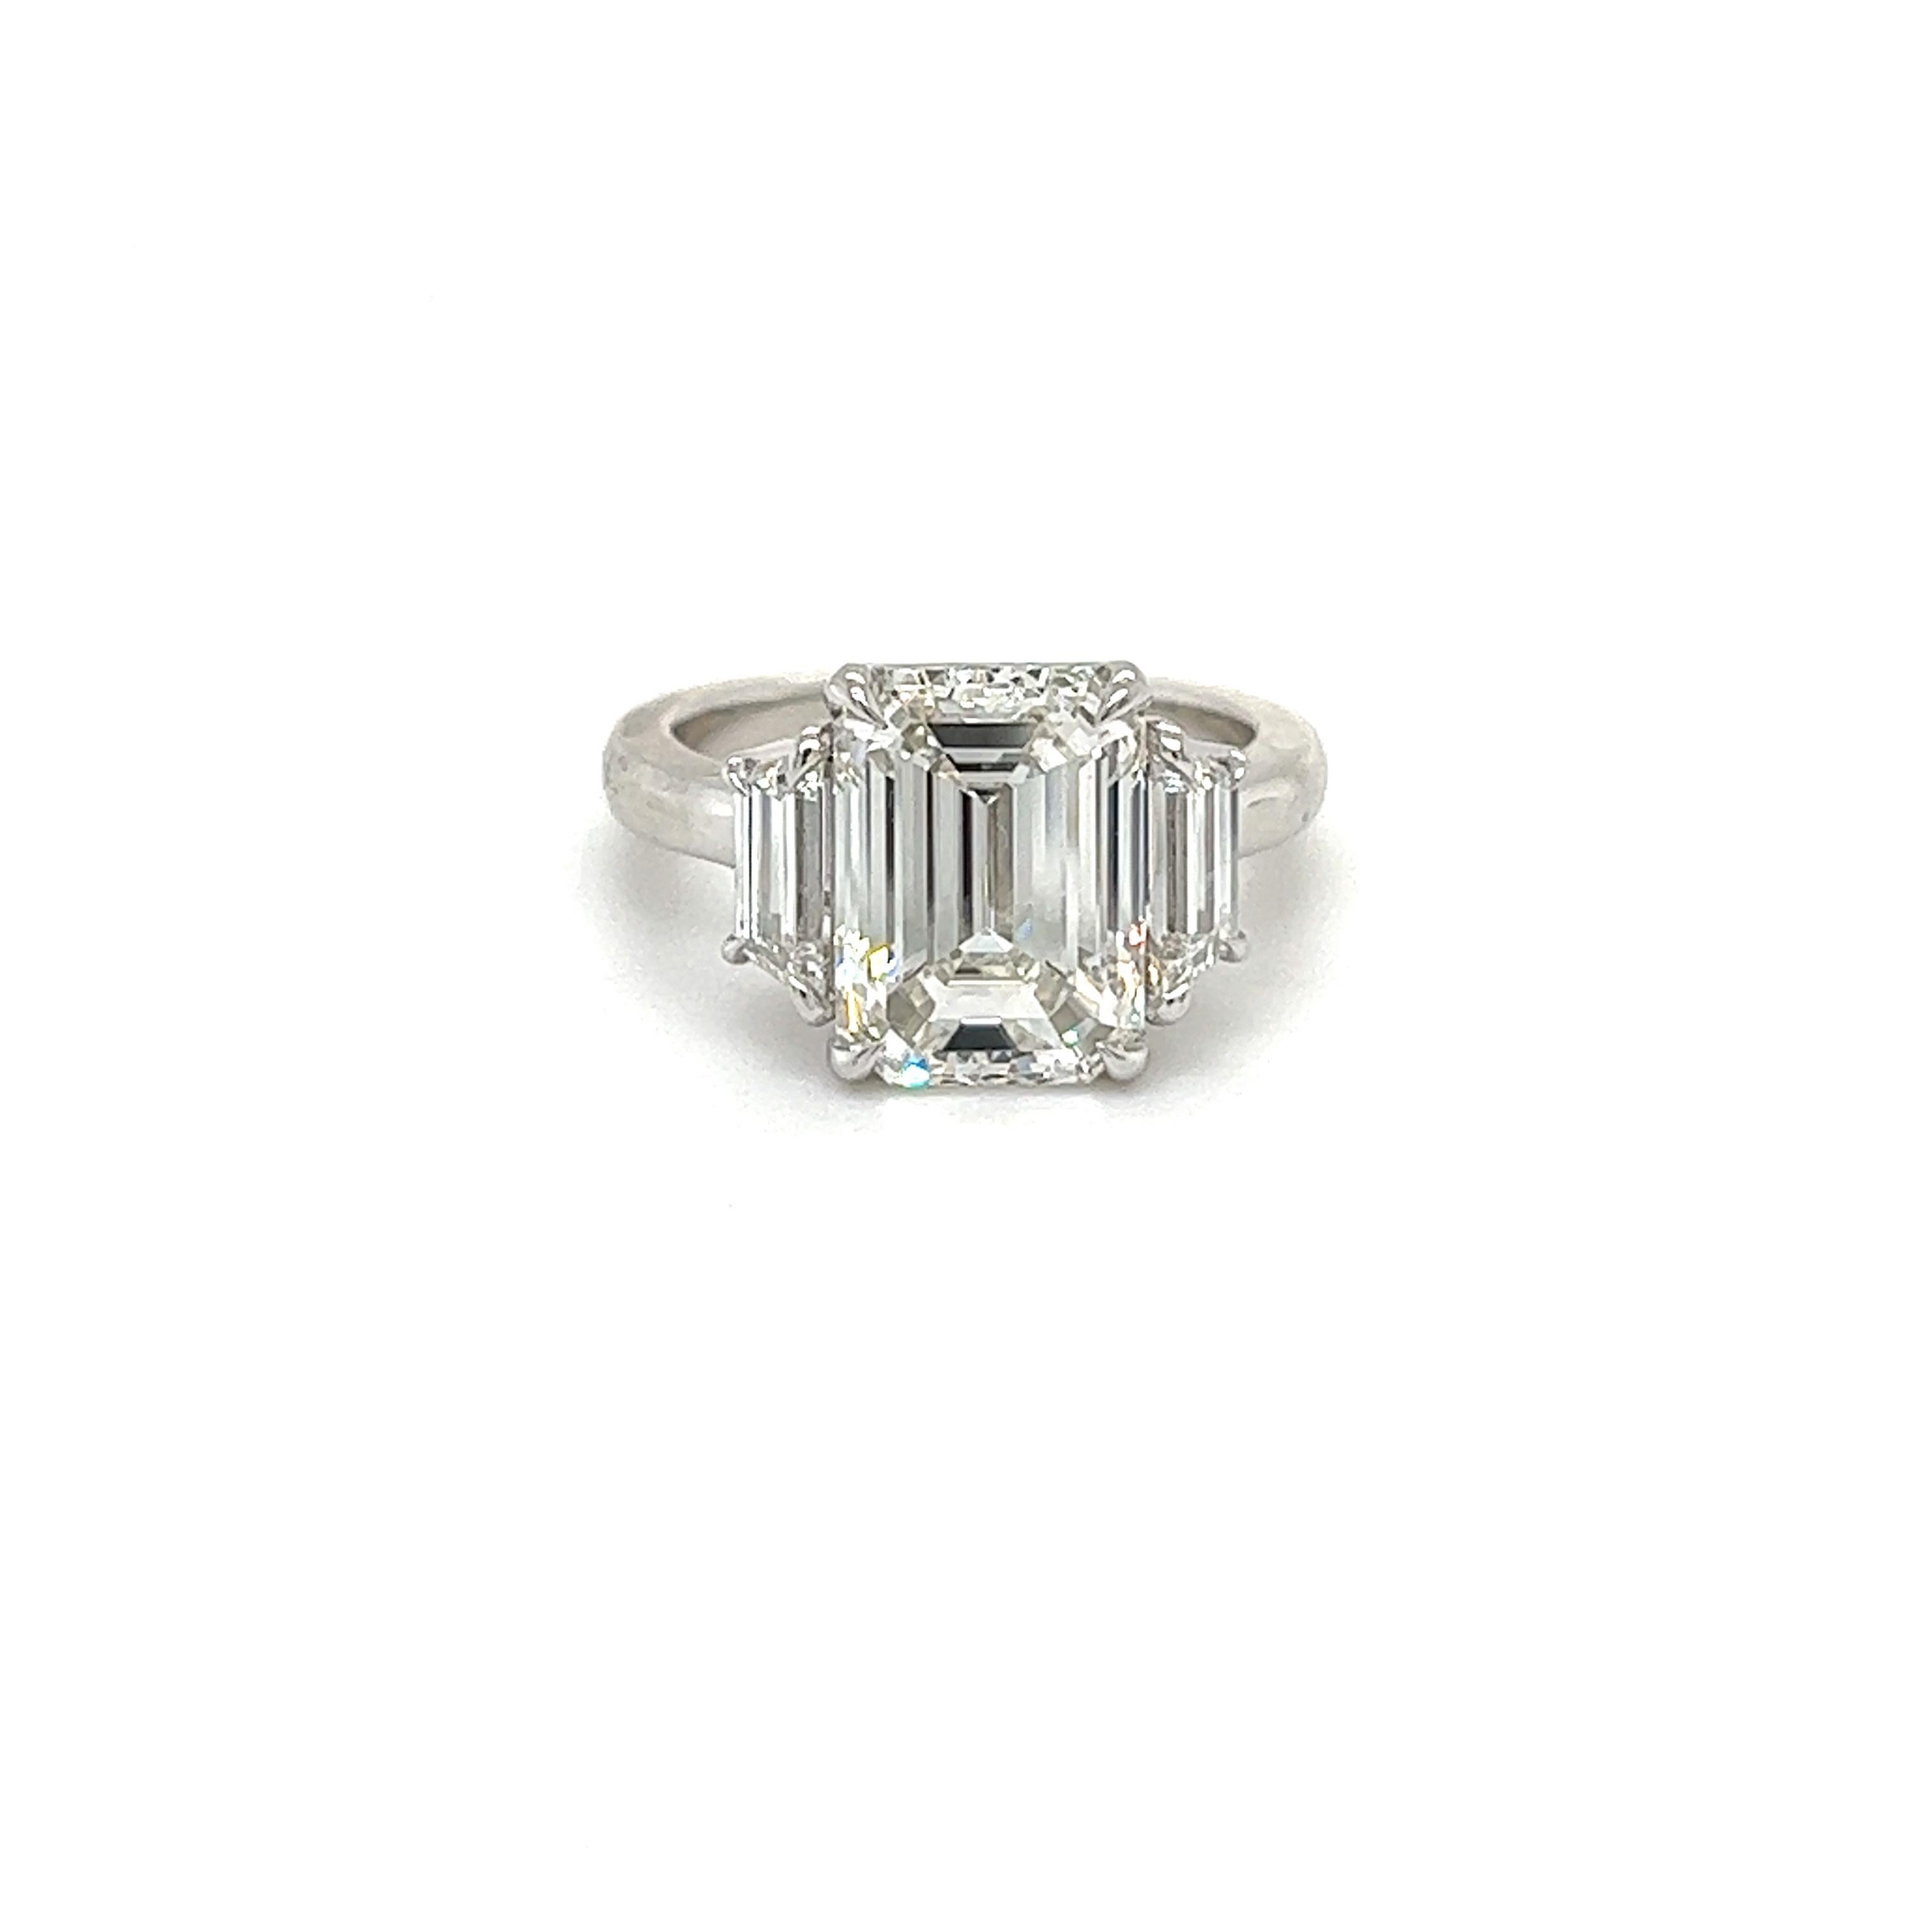 Rosenberg Diamonds & Co. 5.01 carat Emerald cut G color VS1 clarity is accompanied by a GIA certificate. This spectacular Emerald is set in a handmade platinum setting with perfectly matched pair of trapezoid side stones flanking on both sides with